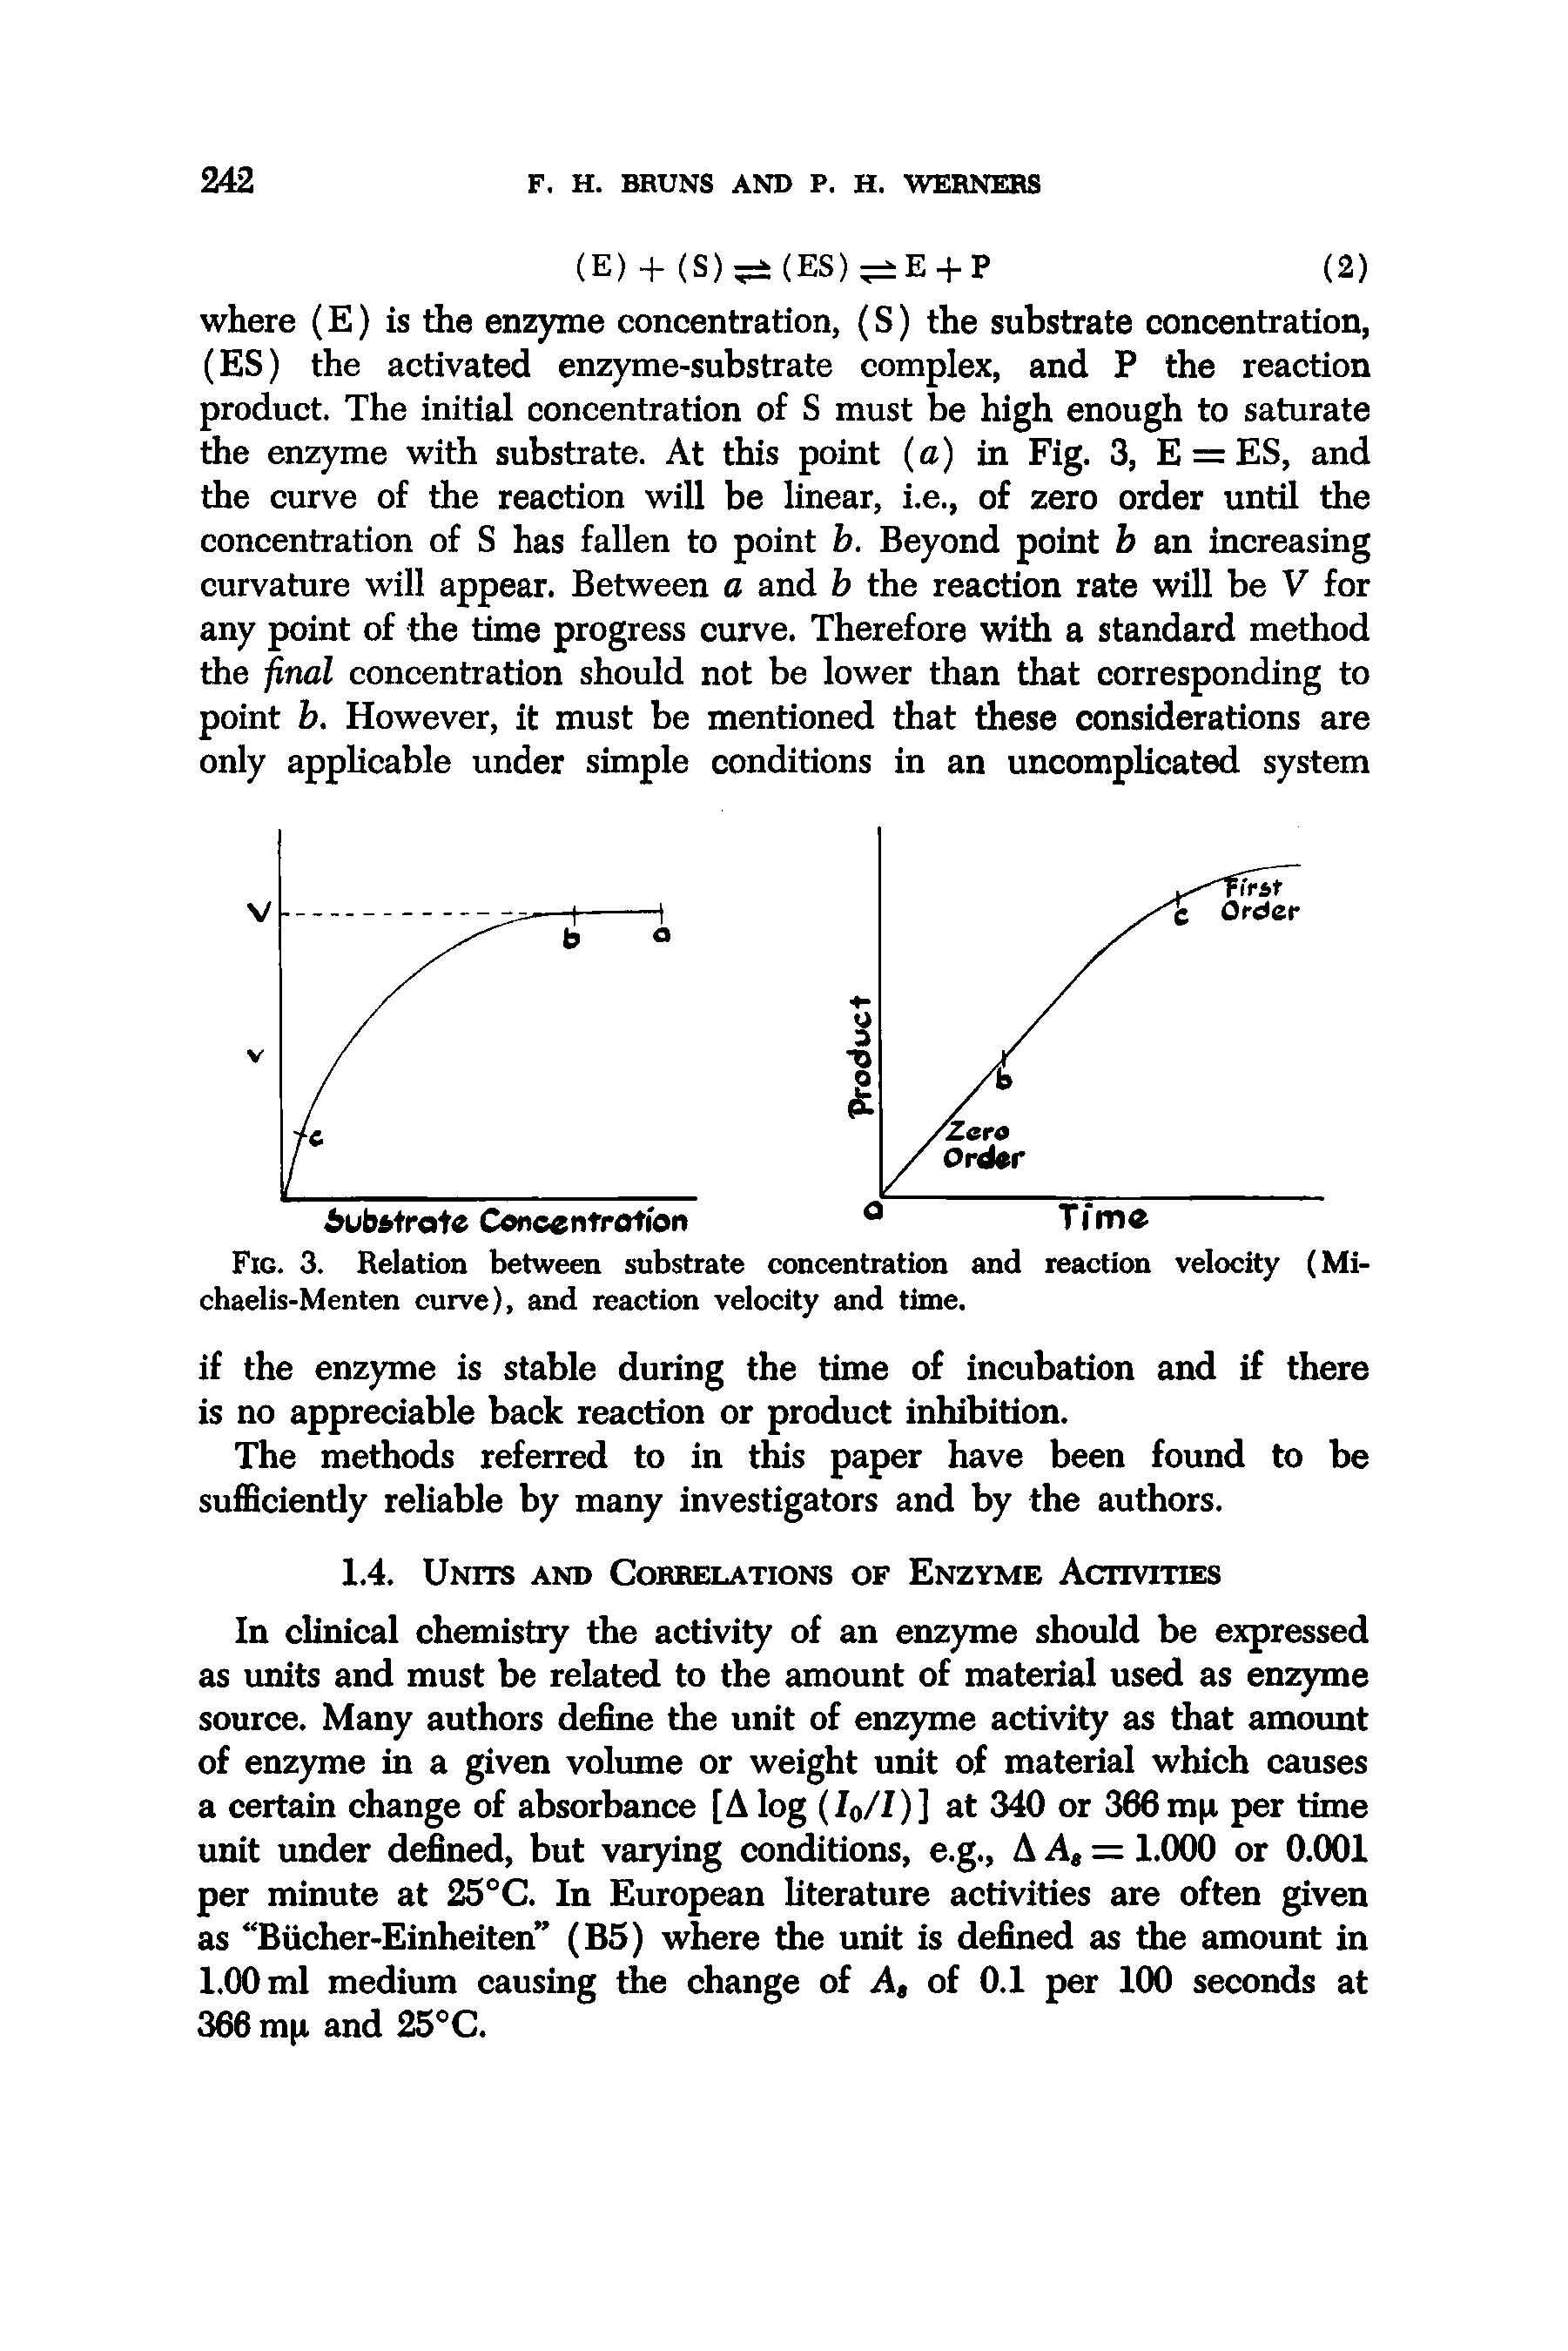 Fig. 3. Relation between substrate concentration and reaction velocity (Mi-chaelis-Menten curve), and reaction velocity and time.